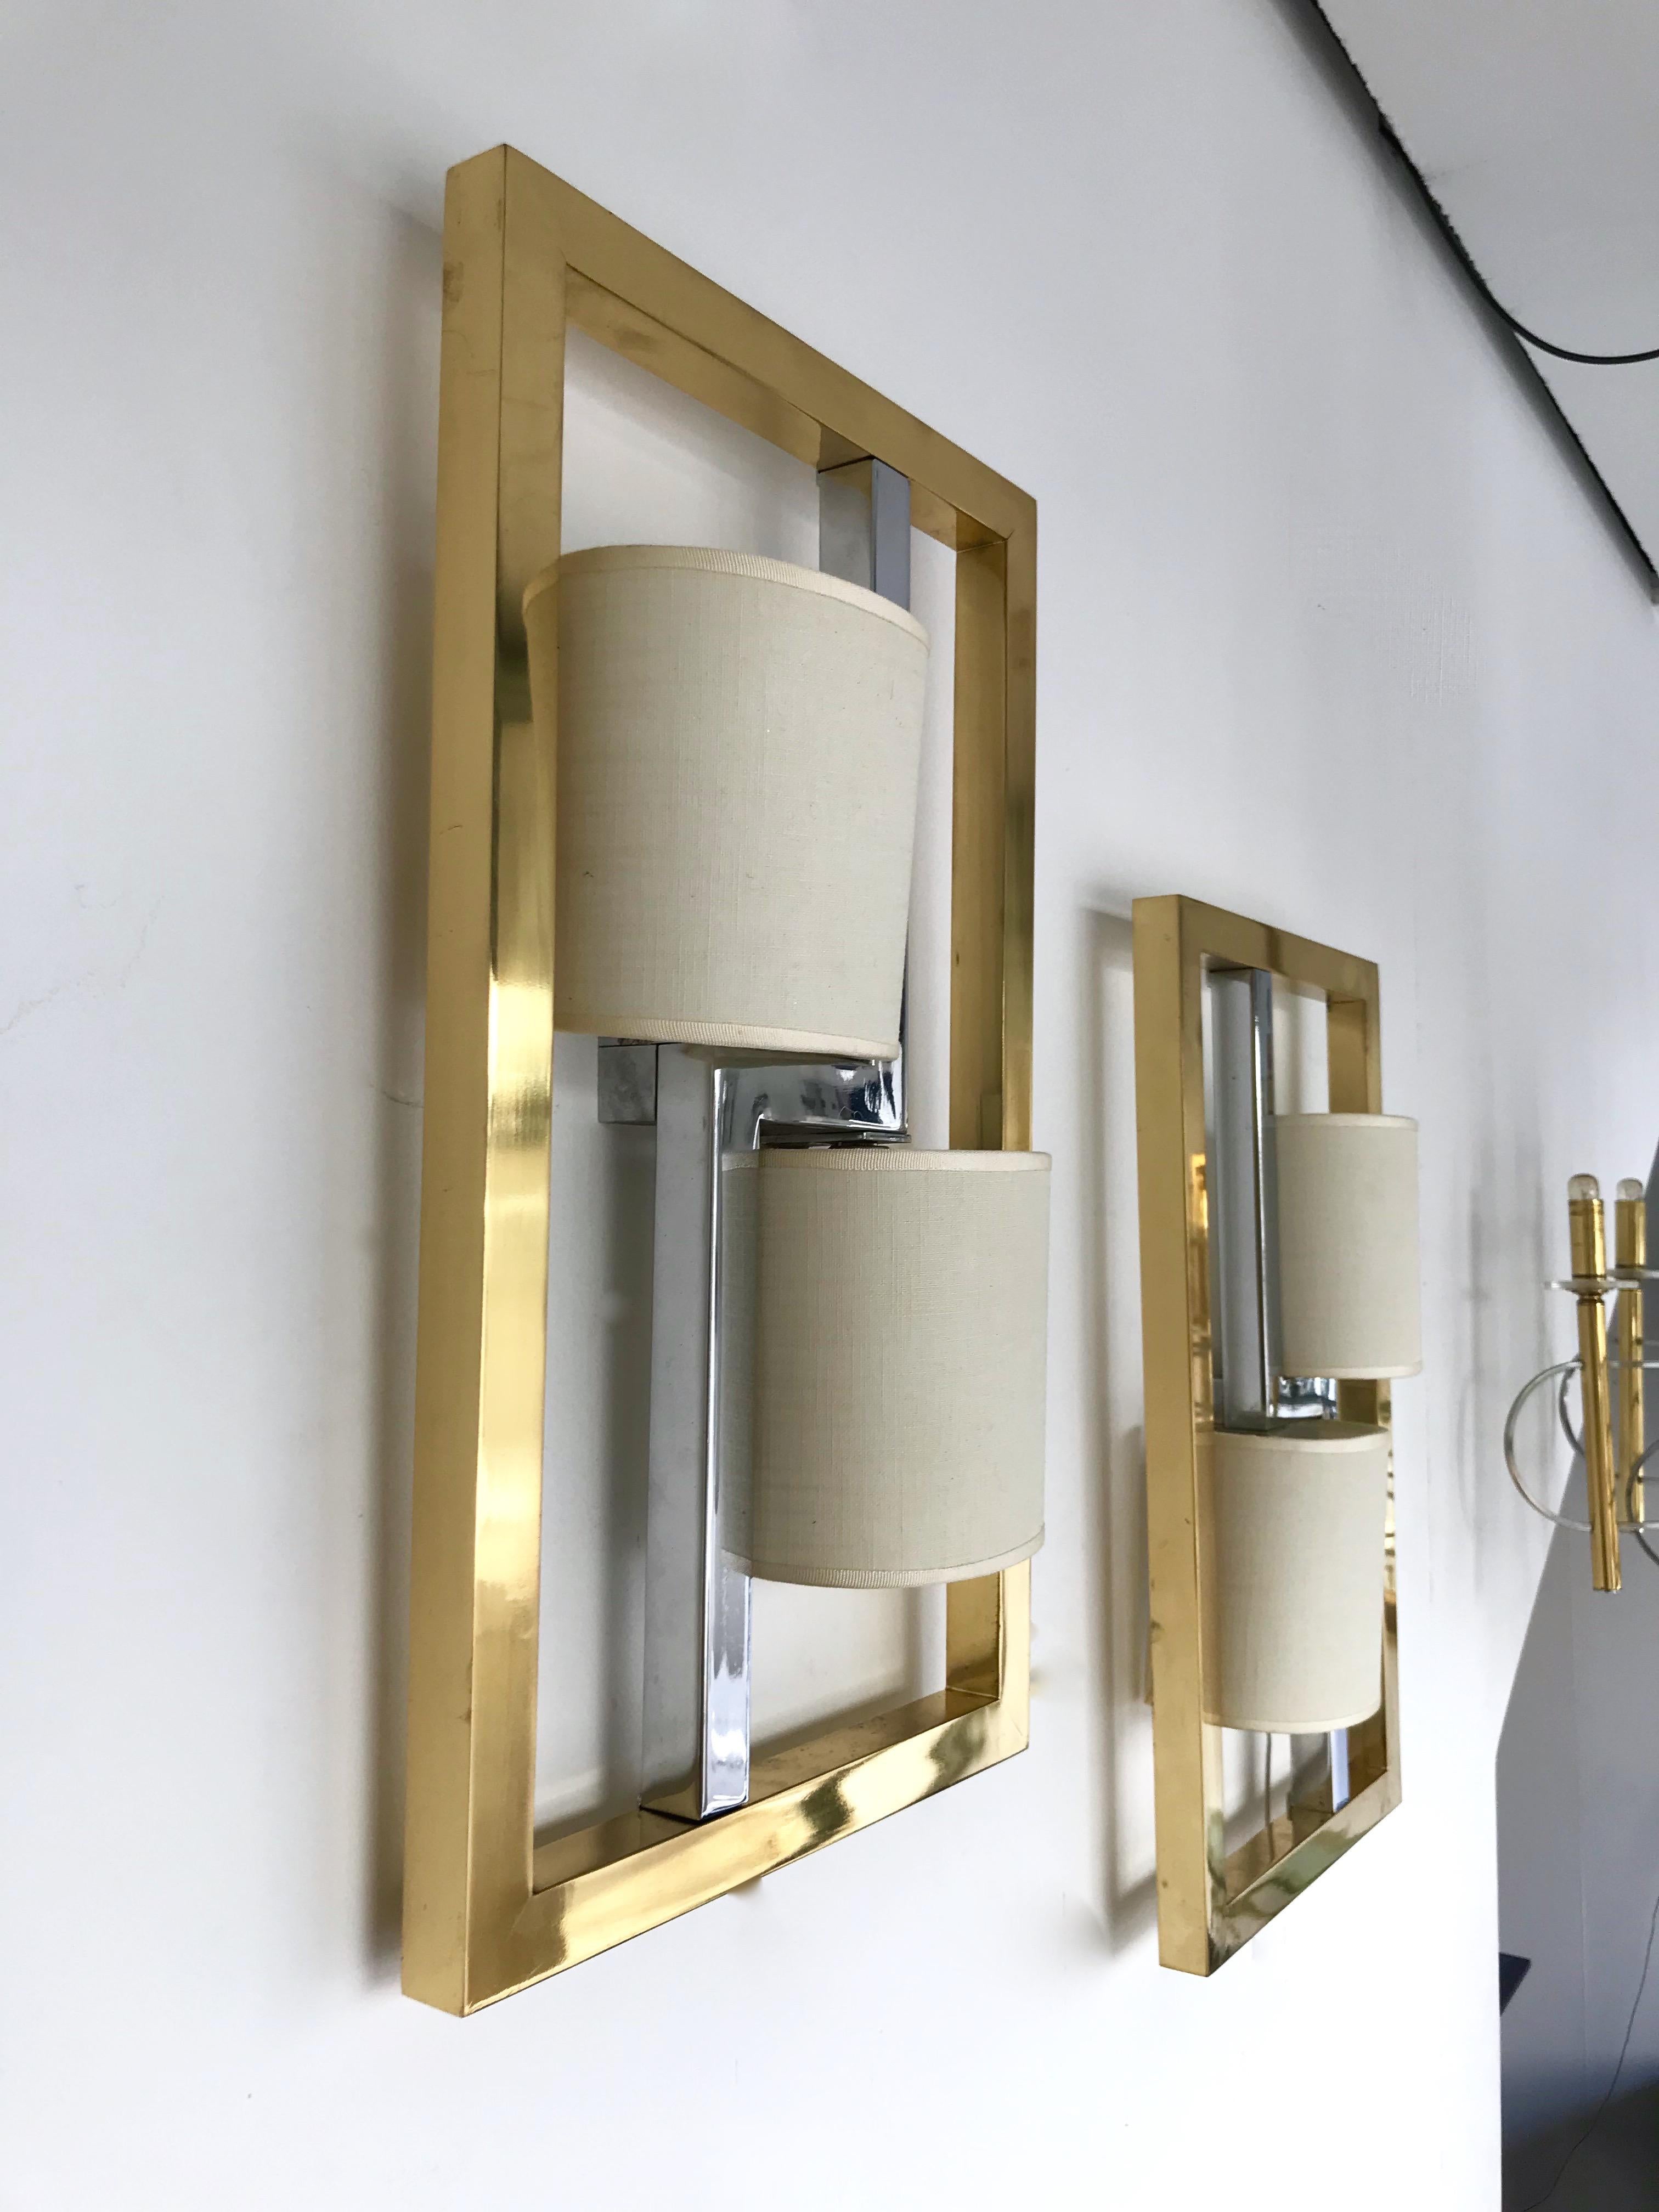 Unusual pair of square frame wall lights sconces in brass and metal chrome by the editor Banci Firenze. Famous manufacture like Romeo Rega, Maison Jansen, Charles, Bagues, Hollywood Regency, Willy Rizzo, Lumica, Mario Sabot, Belgo Chrome.